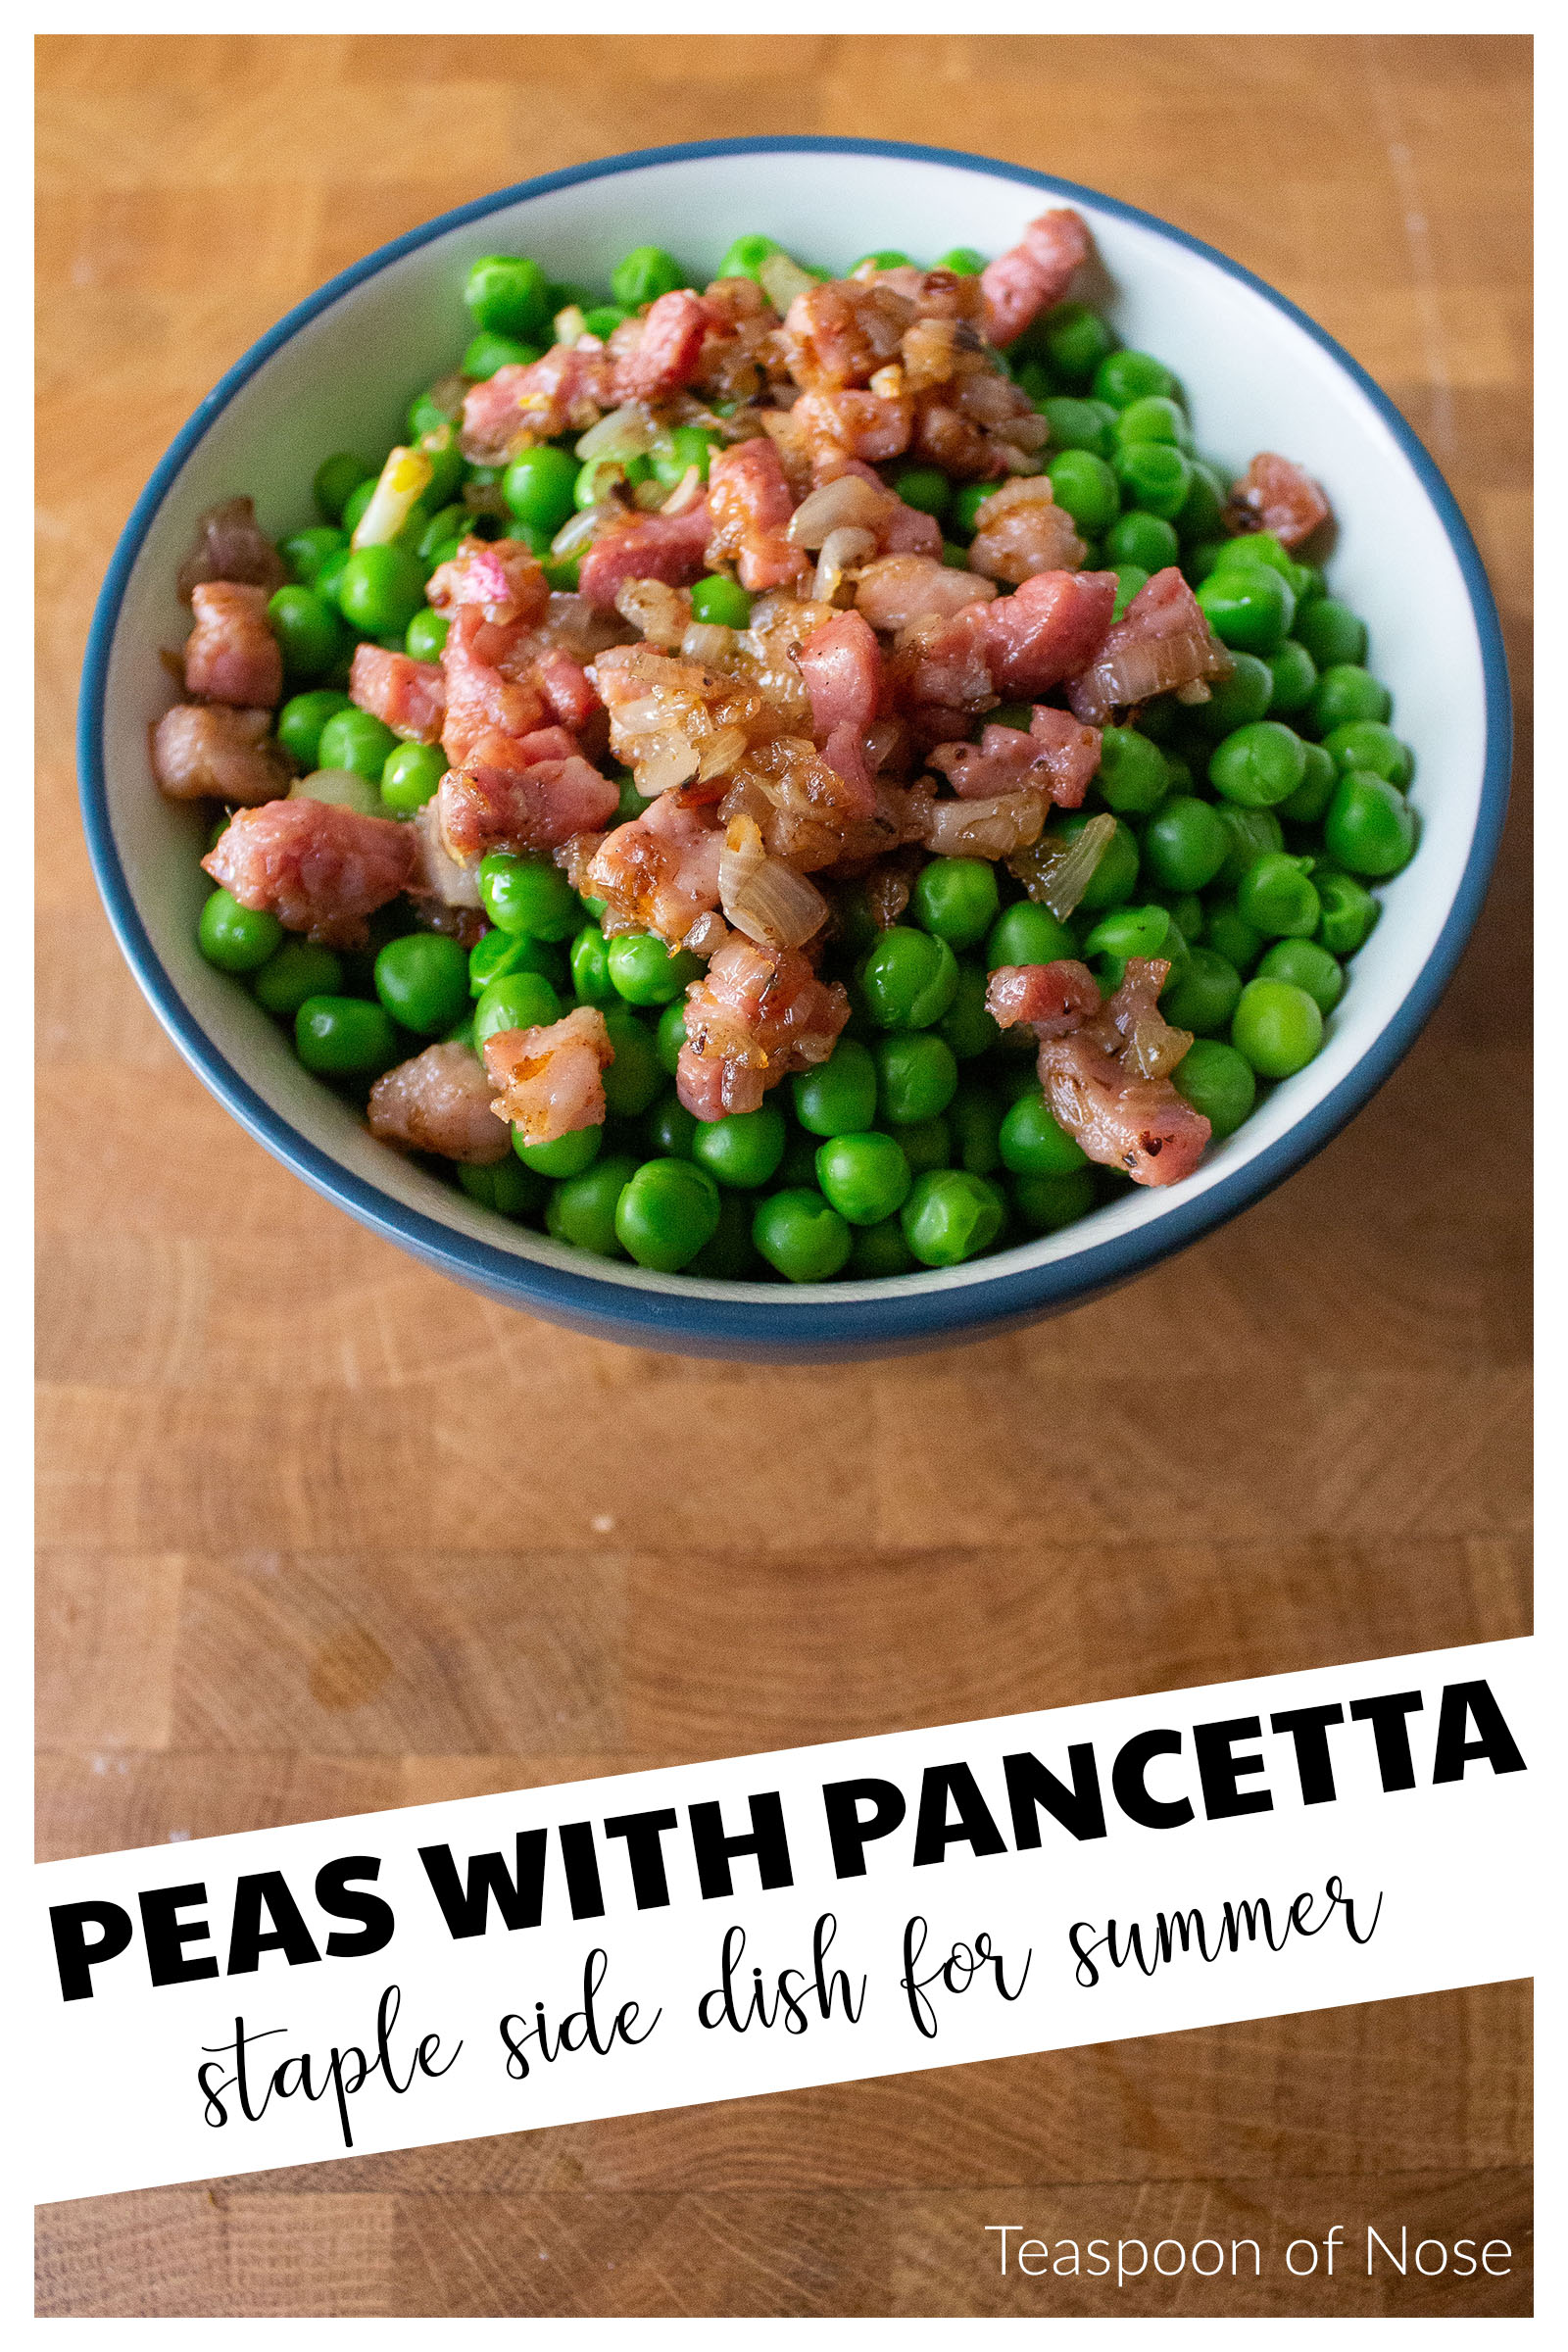 Peas with Pancetta - Teaspoon of Nose